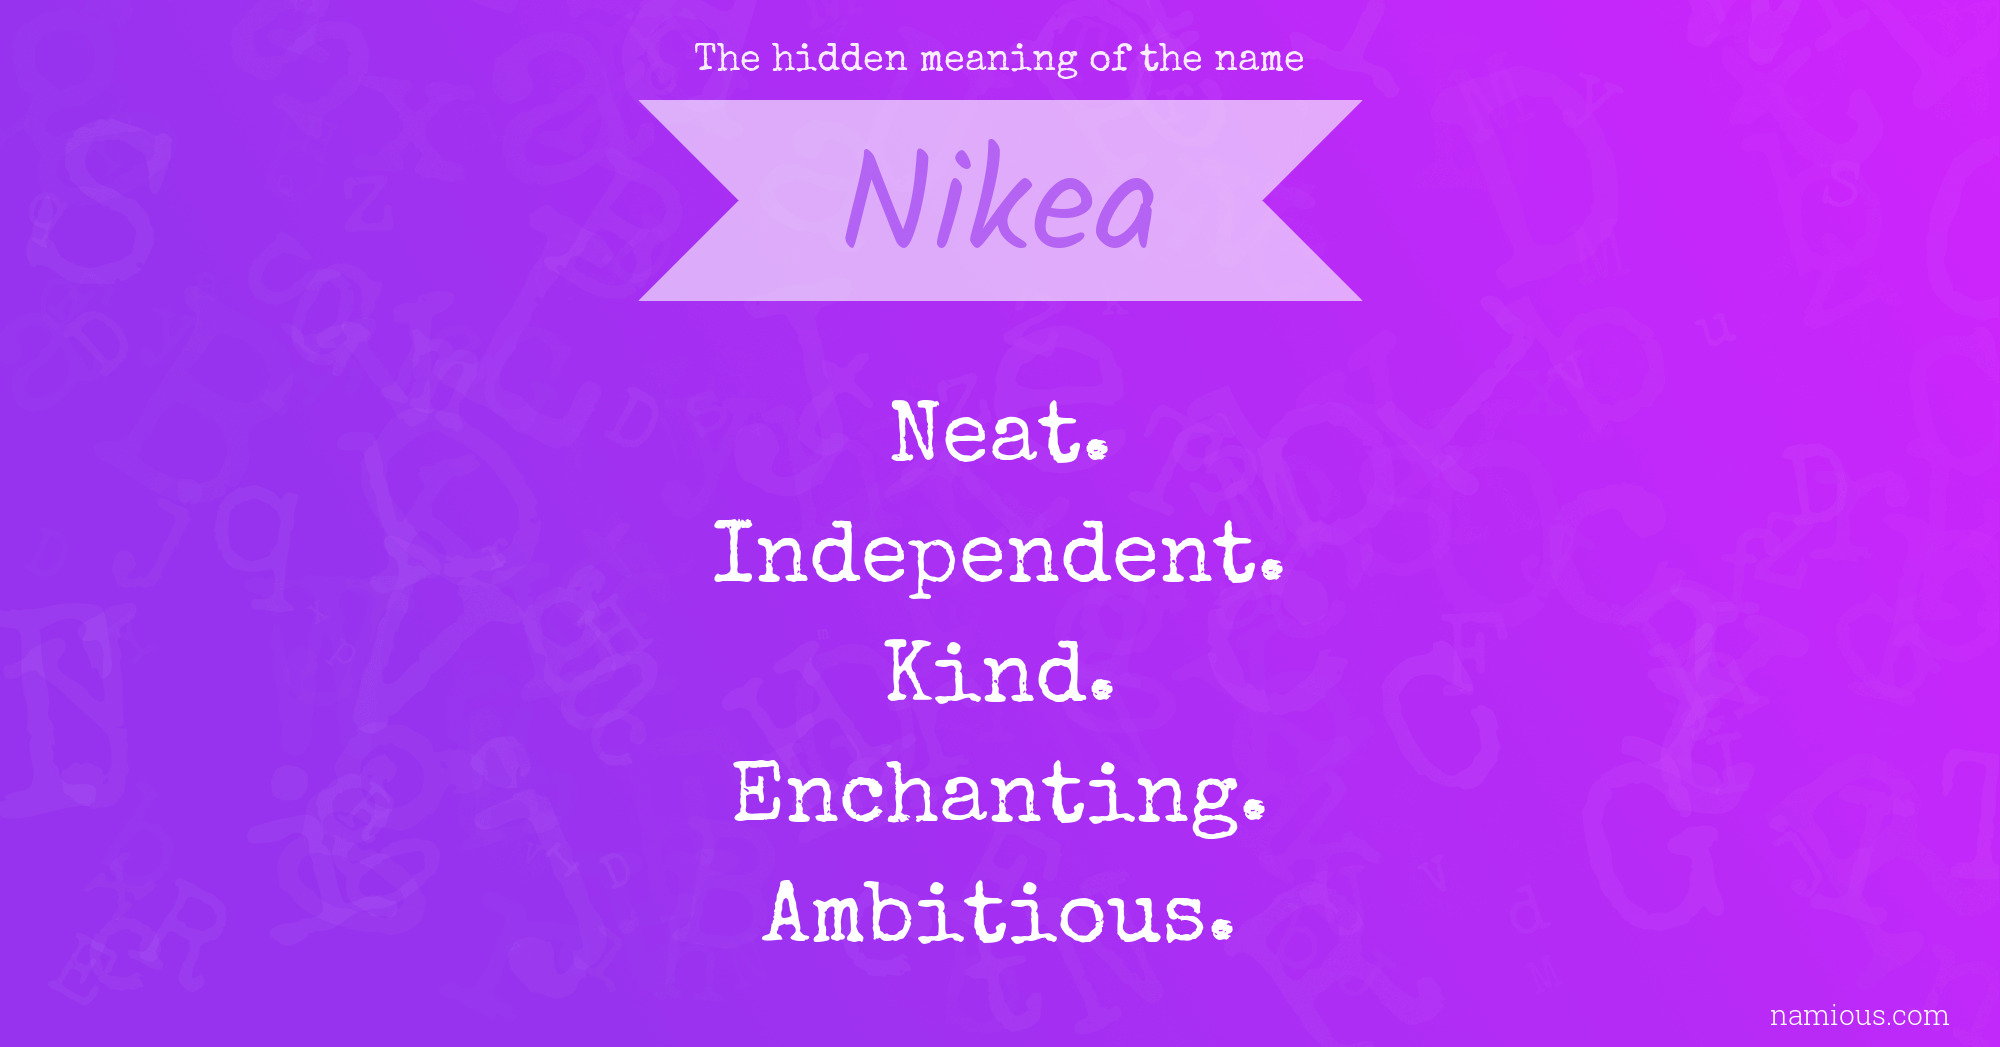 The hidden meaning of the name Nikea